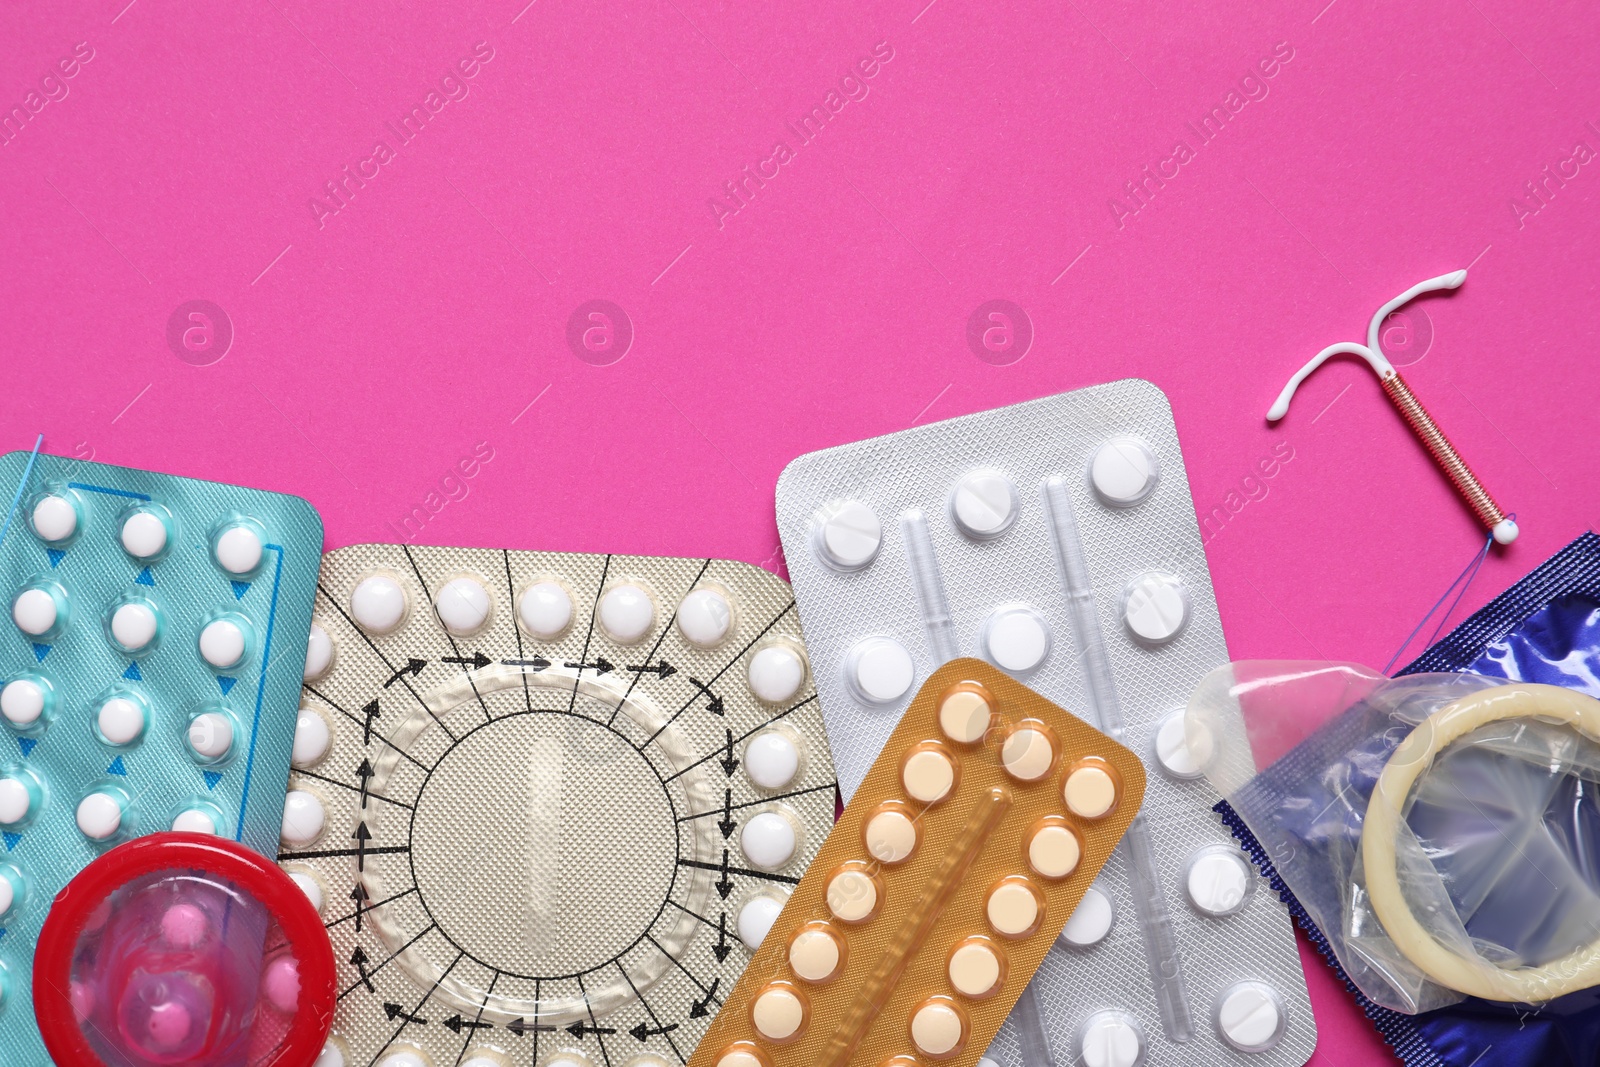 Photo of Contraceptive pills, condoms and intrauterine device on pink background, flat lay with space for text. Different birth control methods